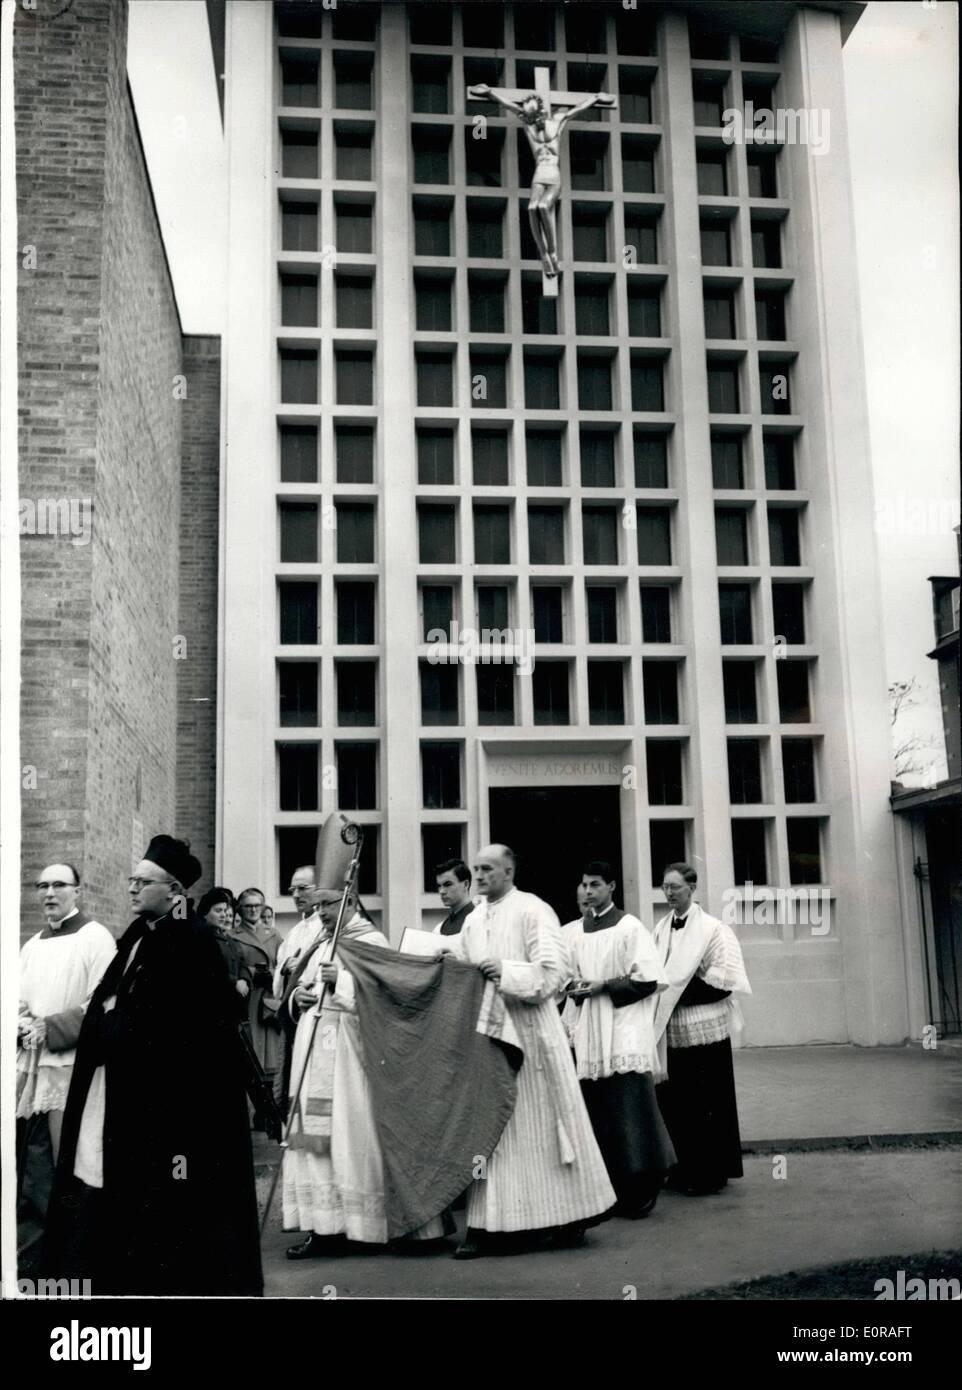 Nov. 11, 1958 - New Roman Catholic Church Consecrated: The New Roman Catholic Church of the Perpetual Aderation, Beaufort Street, Chelsea - was consecrated this morning Bishop David Cashman the Auxiliary of Westminster. Photo shows The procession which includes Bishop Cashman - leaving the Church beneath the aluminium crucifix - during the service this morning. The Crucifix is 10ft. high - but only weigh 40 lbs. Stock Photo